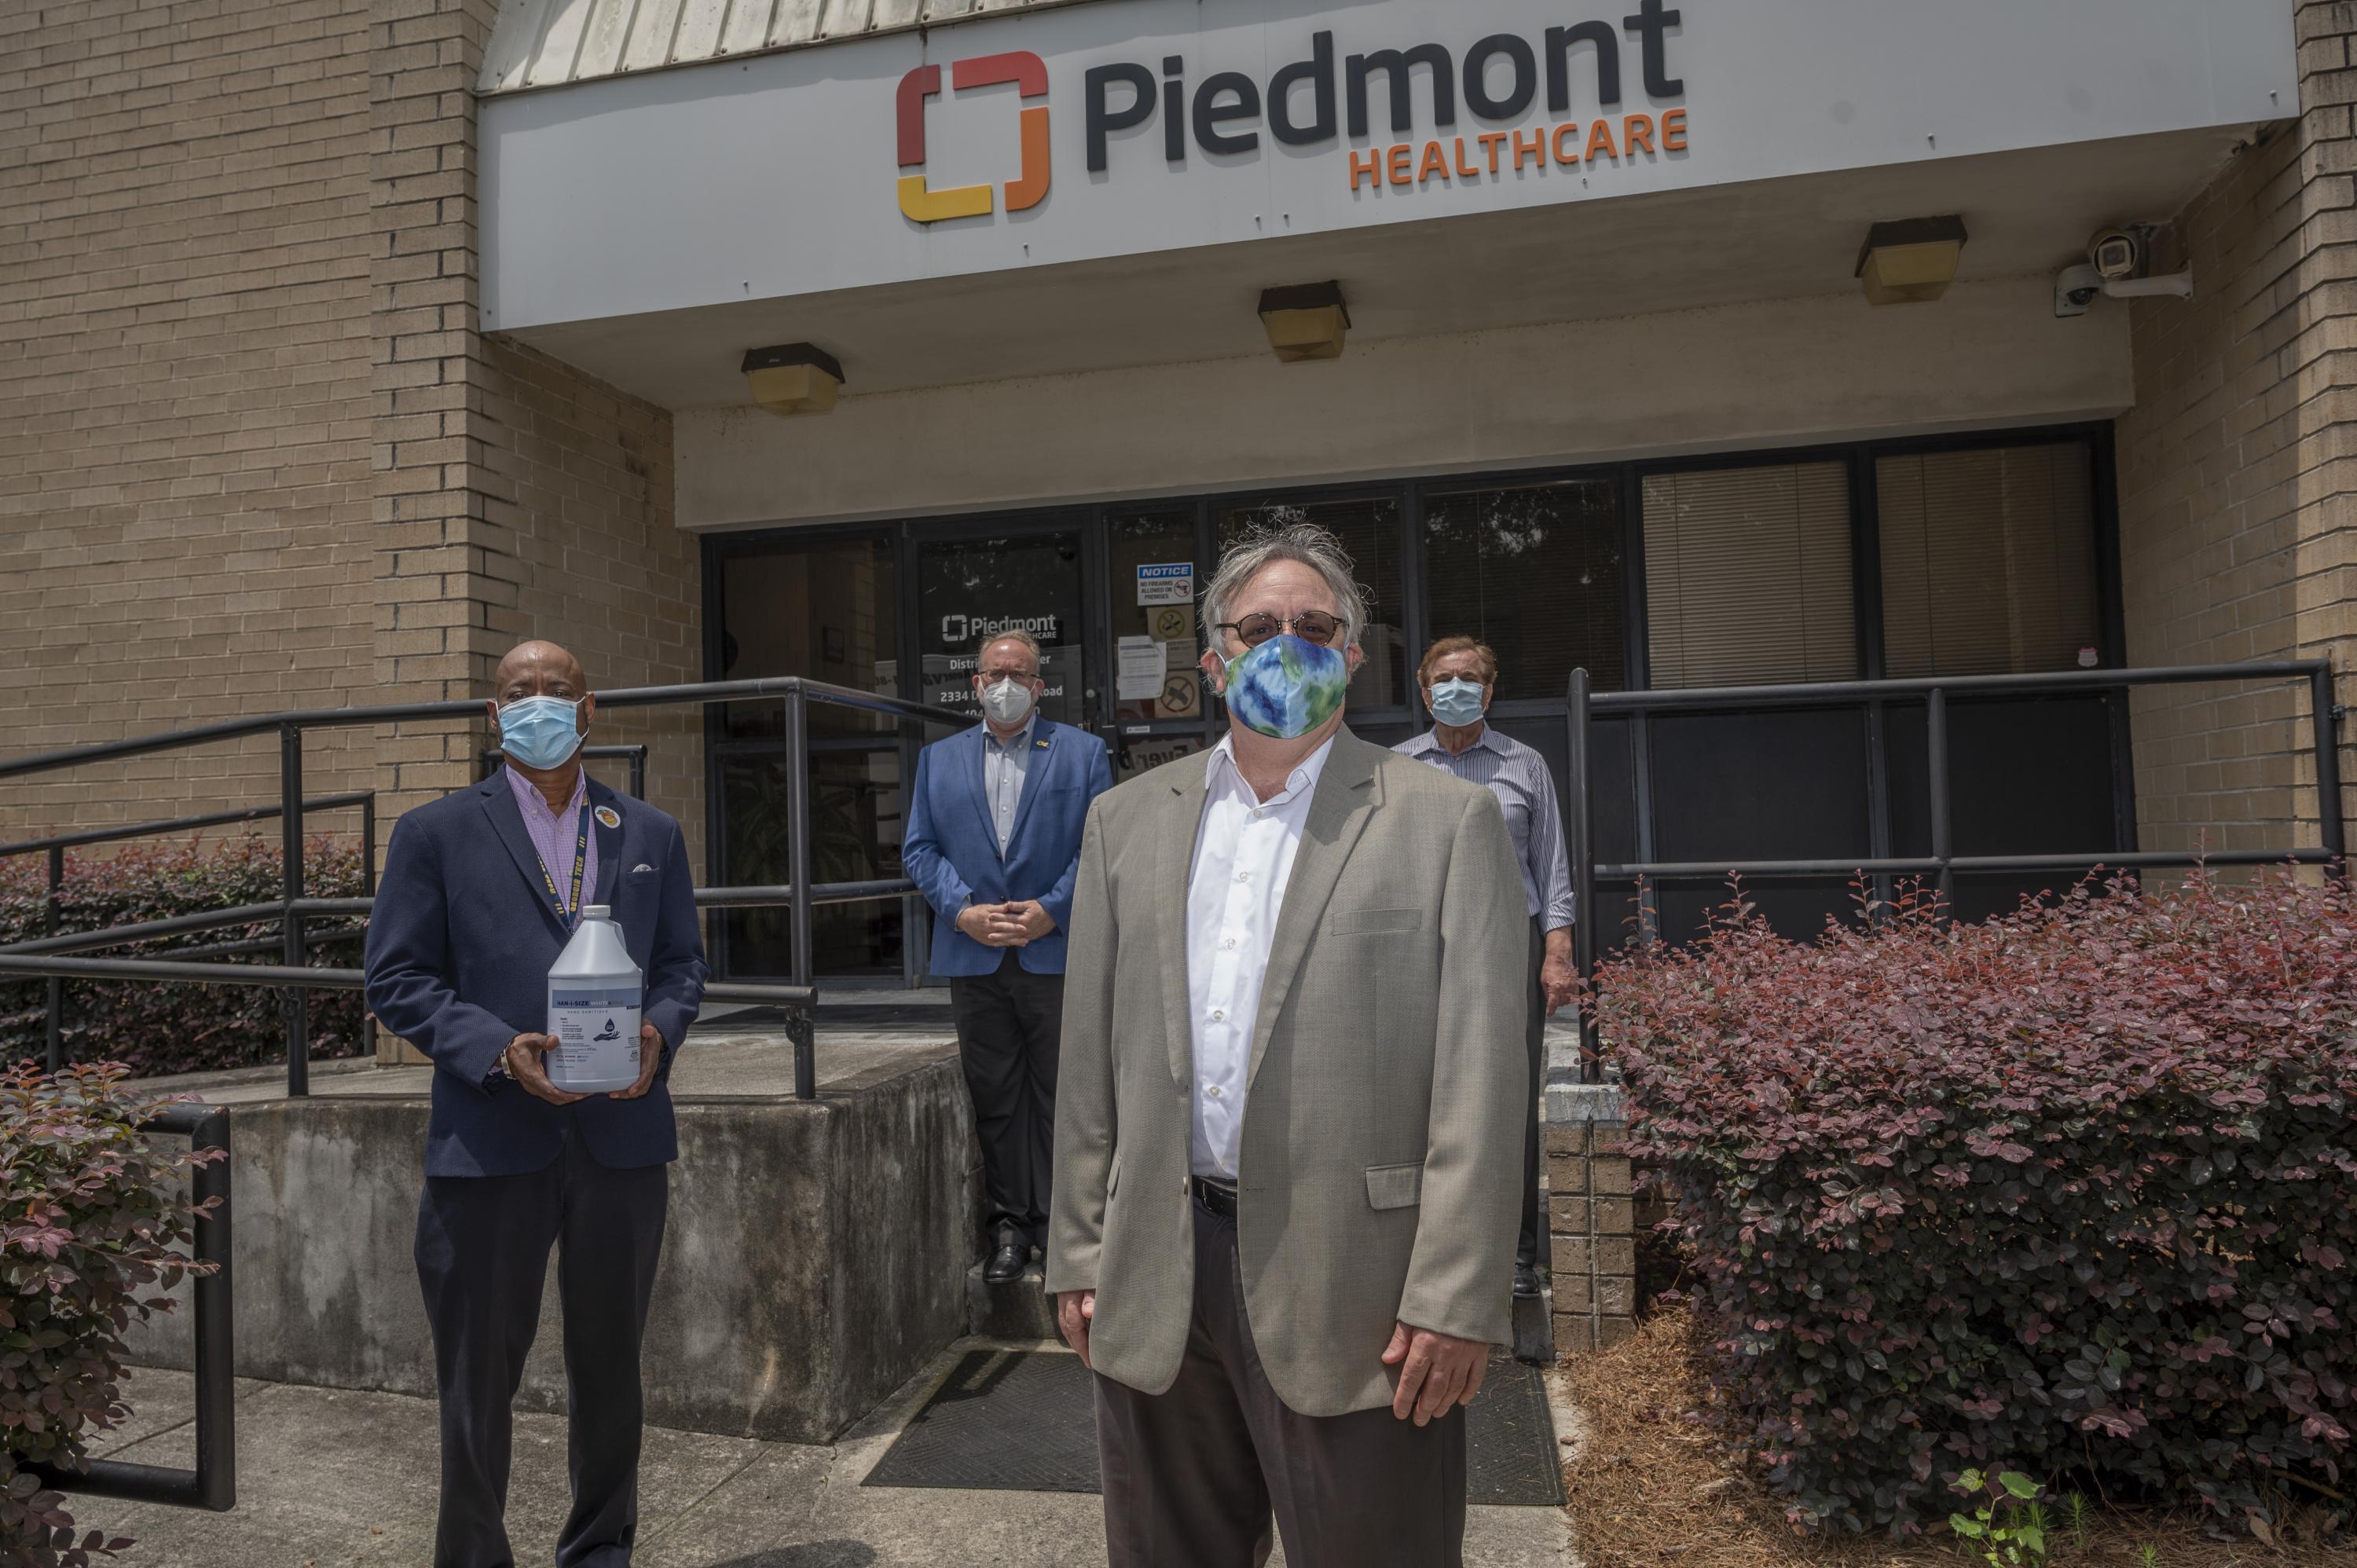 The heroes who redesigned hand sanitizer and donated 7,000 gallons of their own brand to hospitals and nursing homes. From left to right: George White, Chris Luettgen, Seth Marder, and Atif Dabdoub. Here at a delivery to Piedmont Healthcare of Atlanta. Credit: Georgia Tech / Christopher Moore